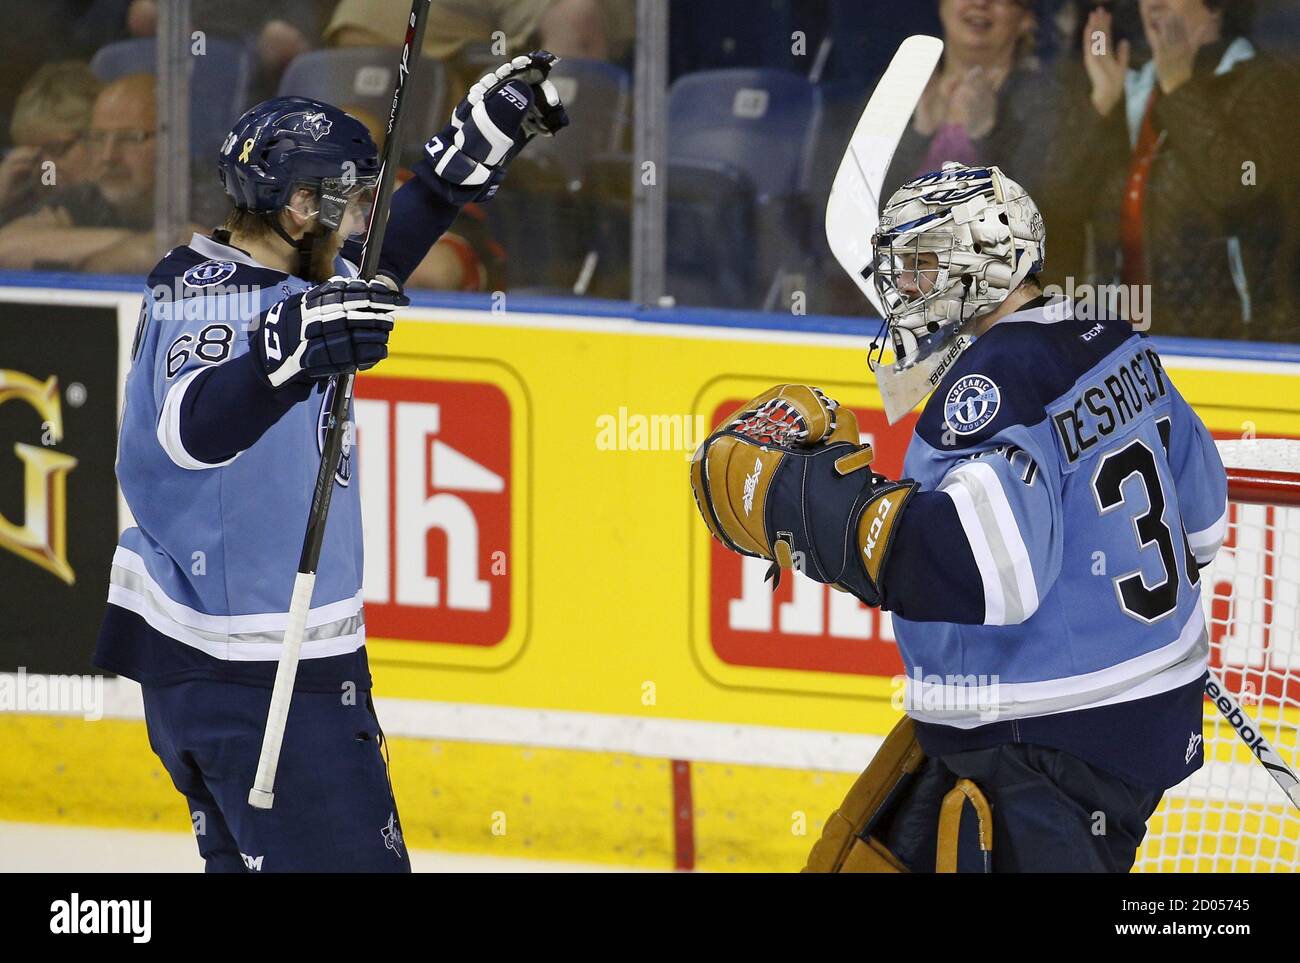 Rimouski Oceanics Guillaume McSween (68) and goalie Philippe Desrosiers celebrate their victory against the Quebec Remparts during their Memorial Cup hockey game at the Colisee Pepsi in Quebec City, May 27, 2015. REUTERS/Mathieu Belanger Stock Photo